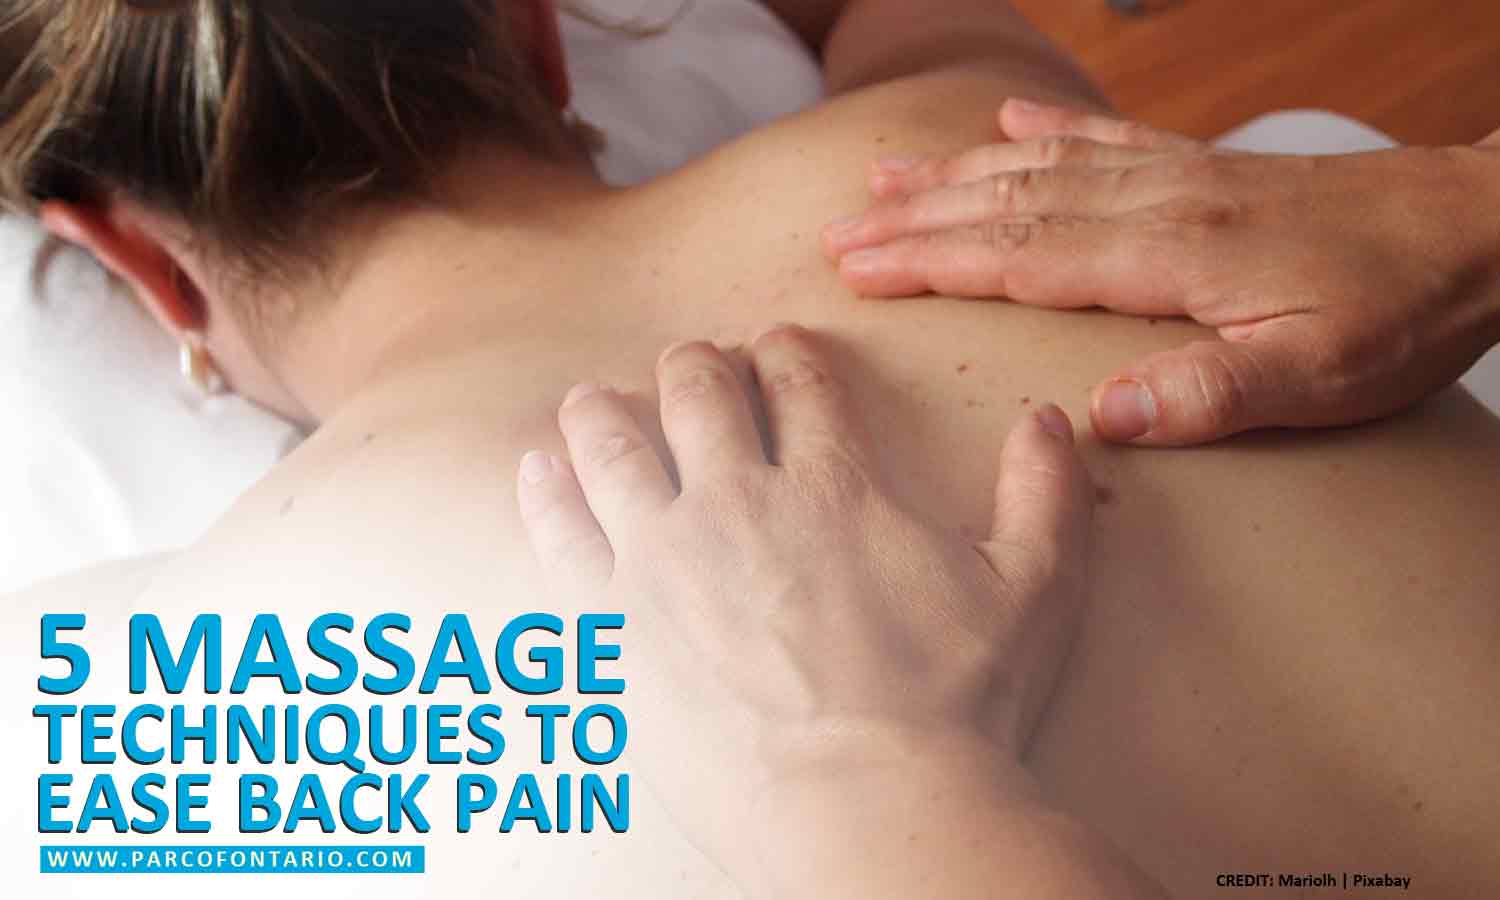 How to Give a Neck Massage in 5 Simple Steps